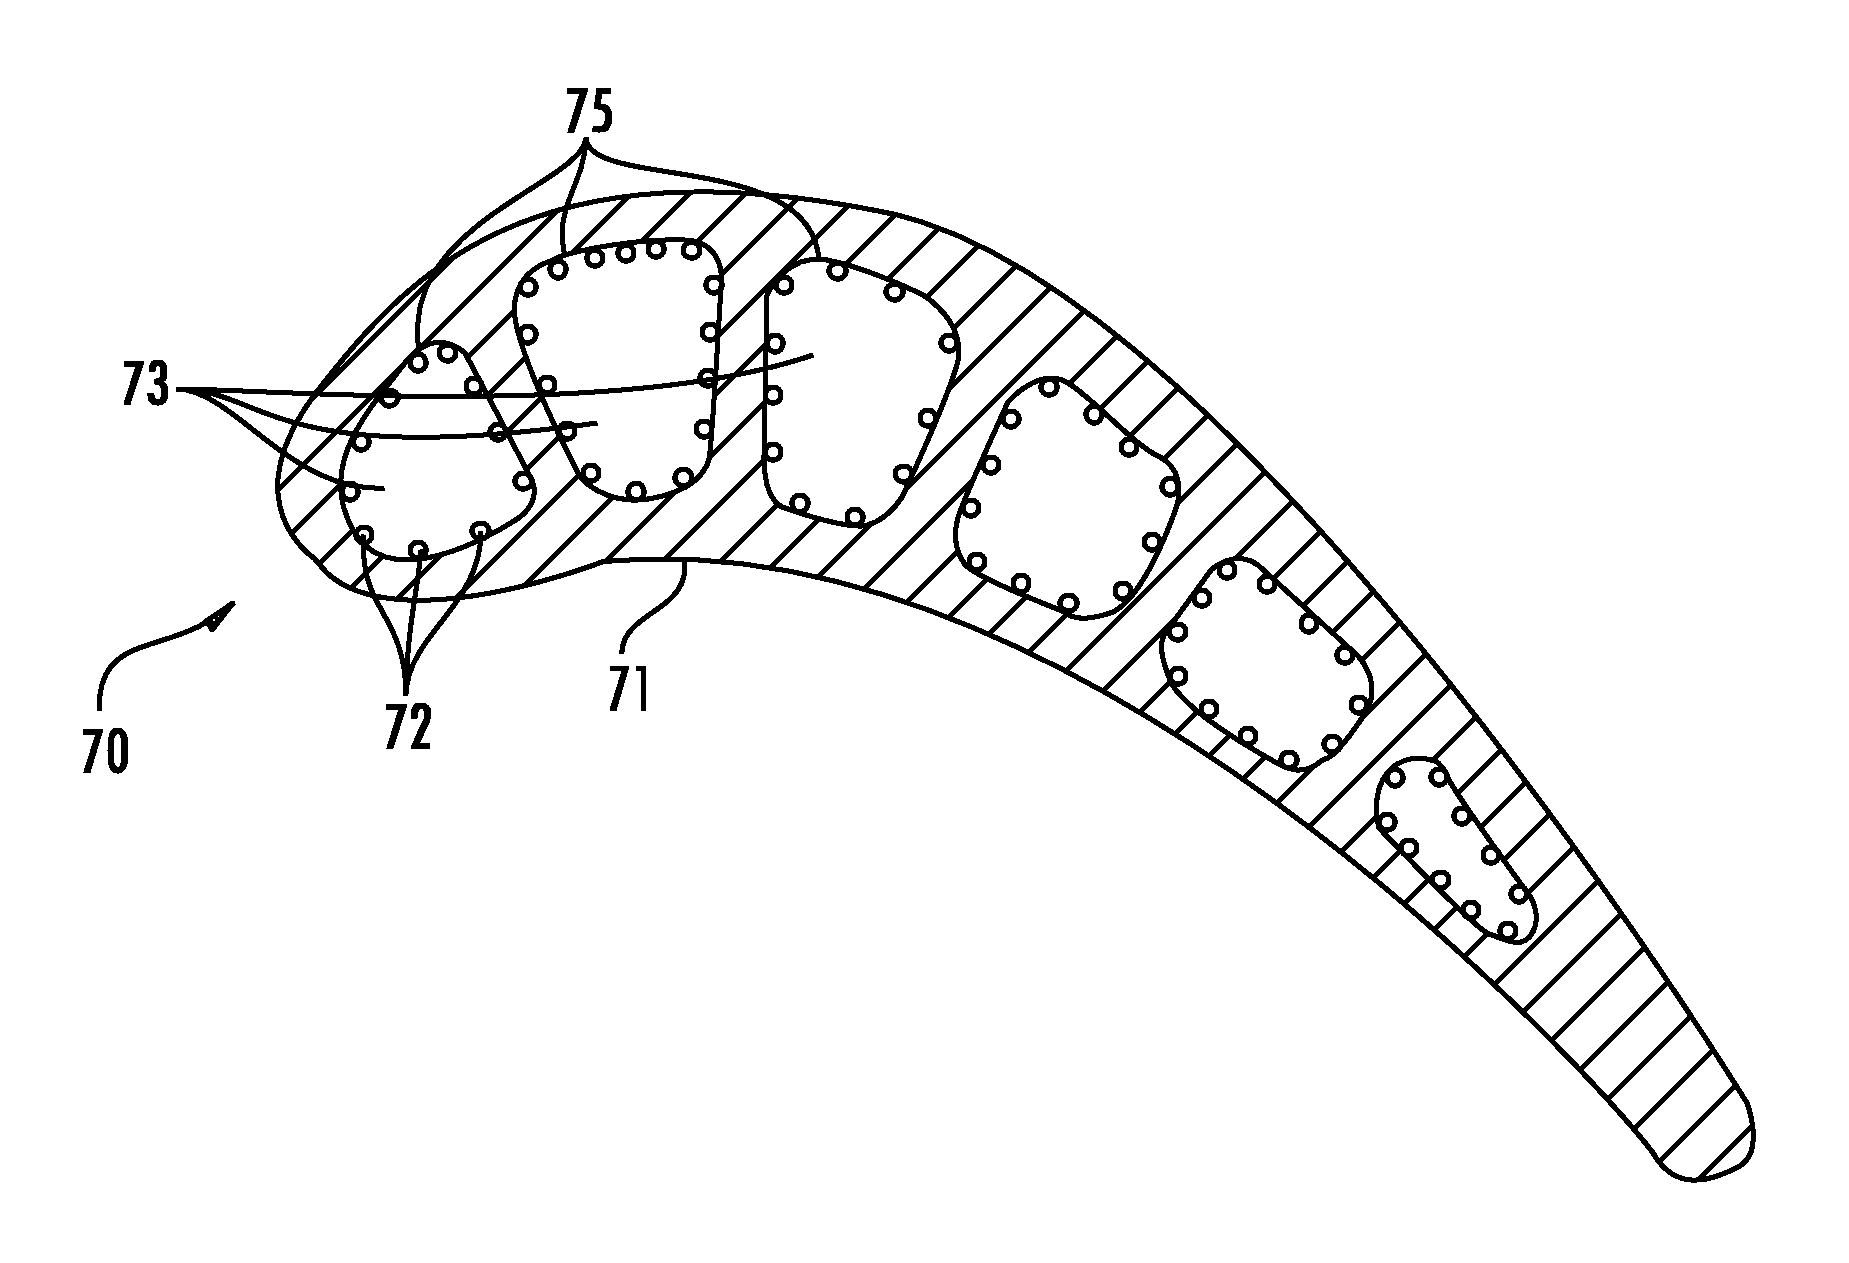 Method of Making a Combustion Turbine Component Having a Plurality of Surface Cooling Features and Associated Components